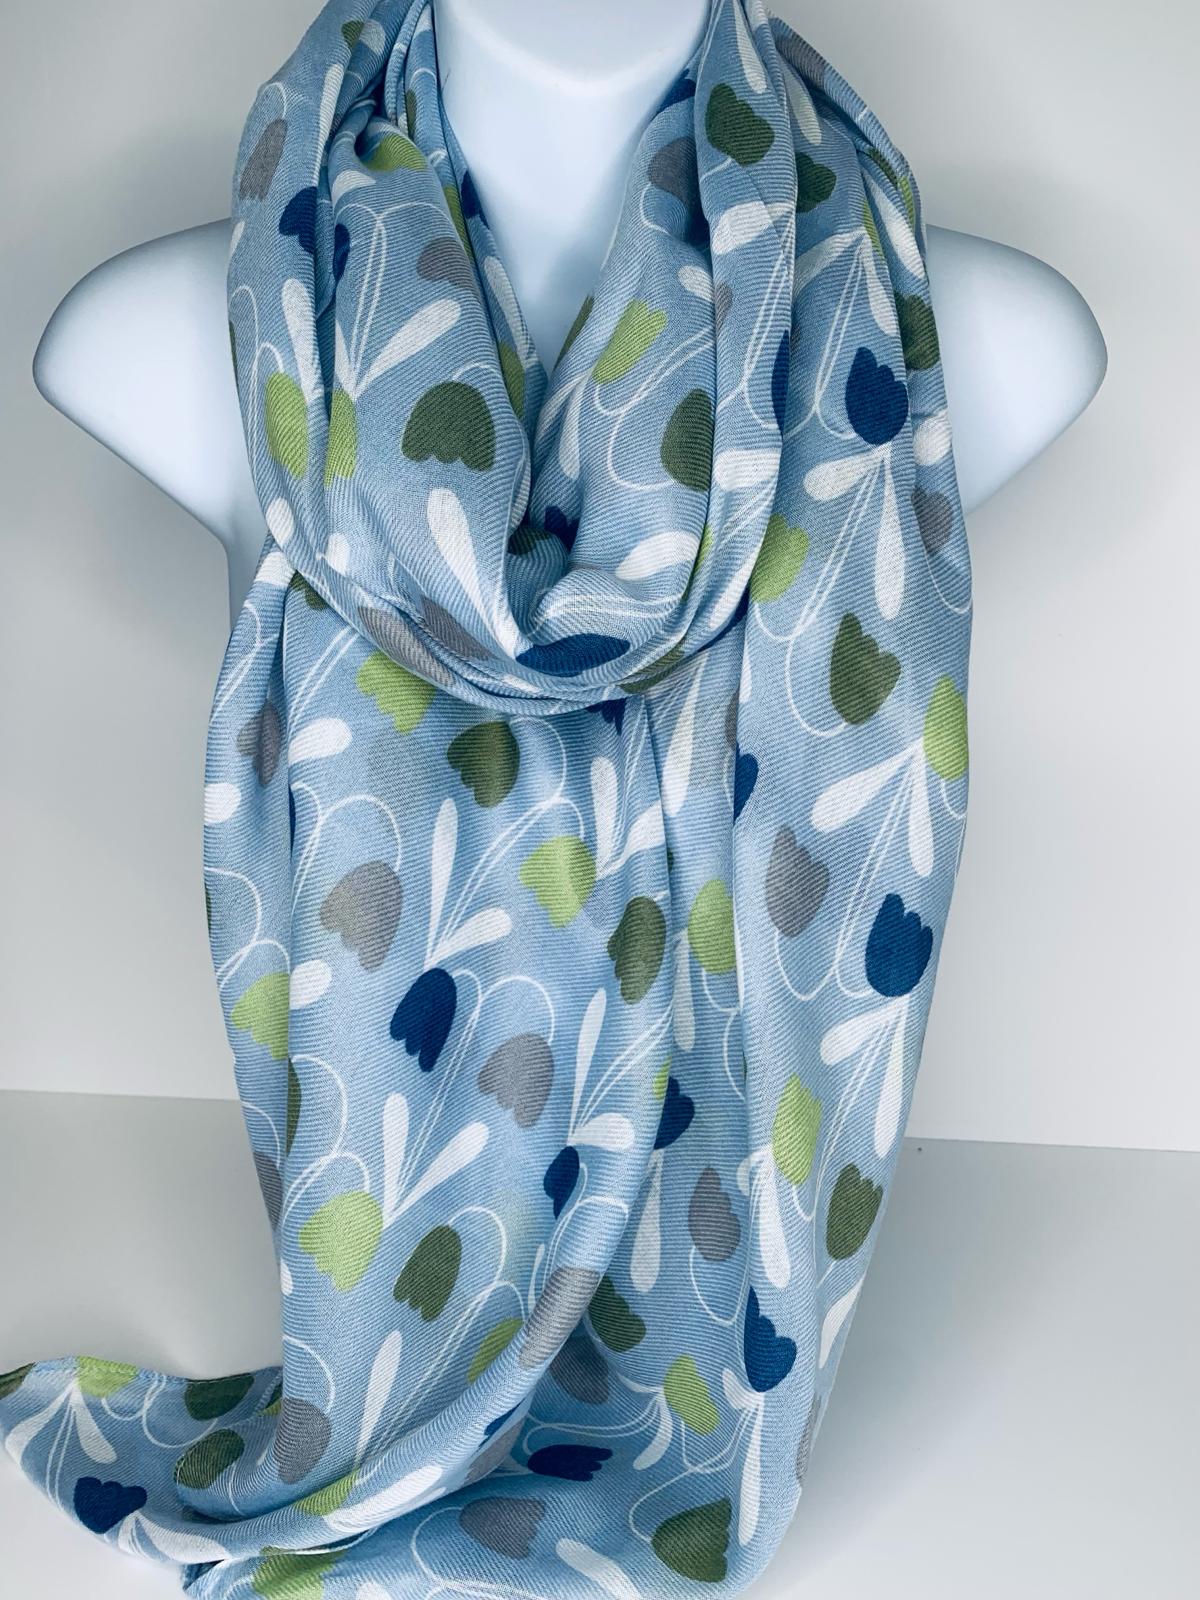 Orla Kiely inspired print scarf in shades of baby blue, green and white